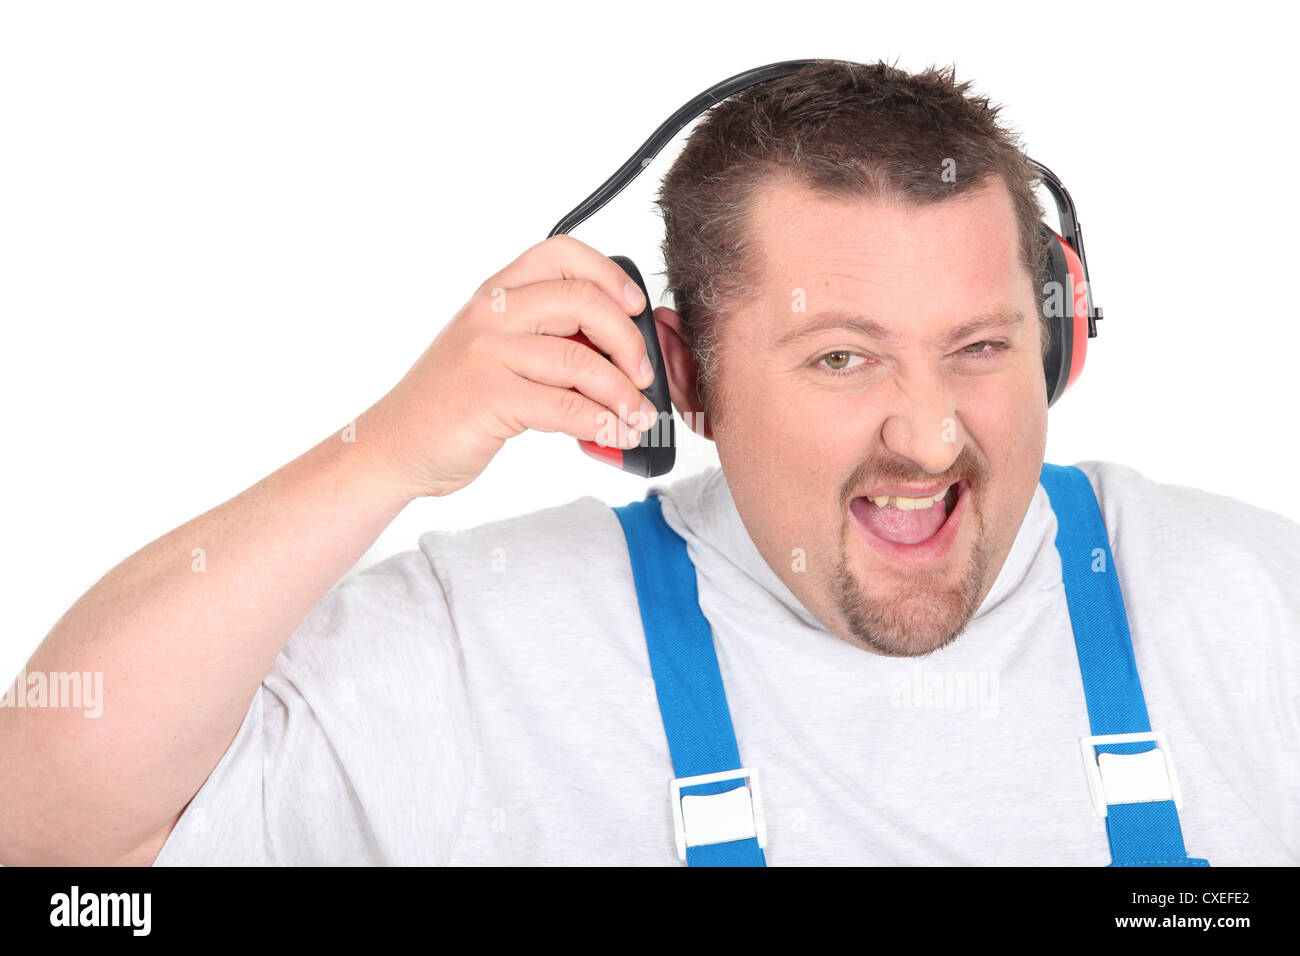 Workman disturbed by noise Stock Photo